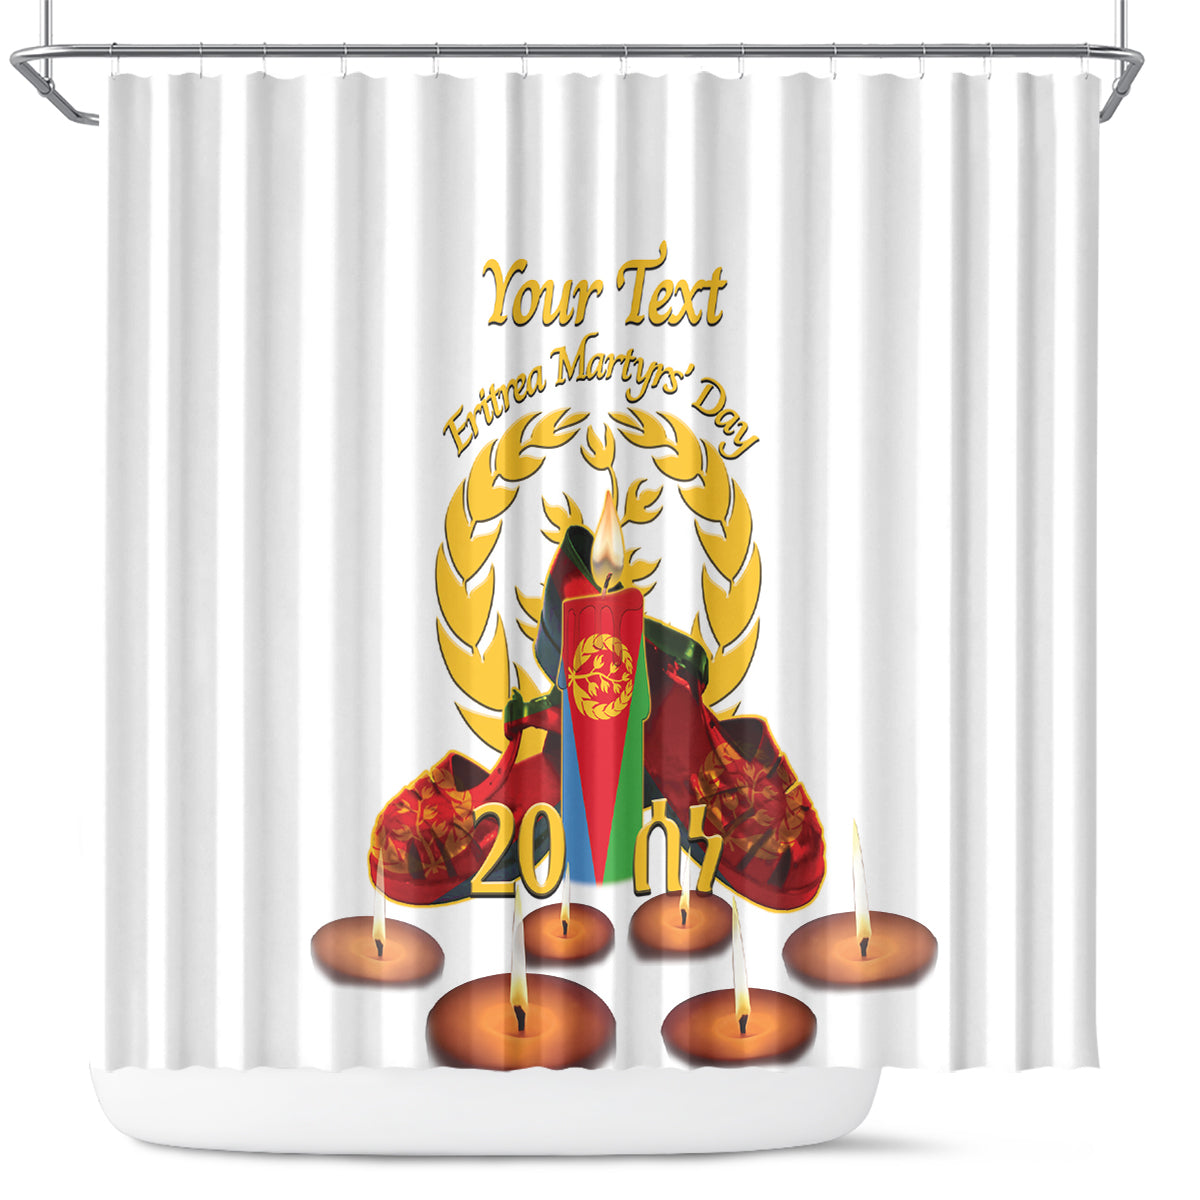 Custom Eritrea Martyrs' Day Shower Curtain 20 June Shida Shoes With Candles - White